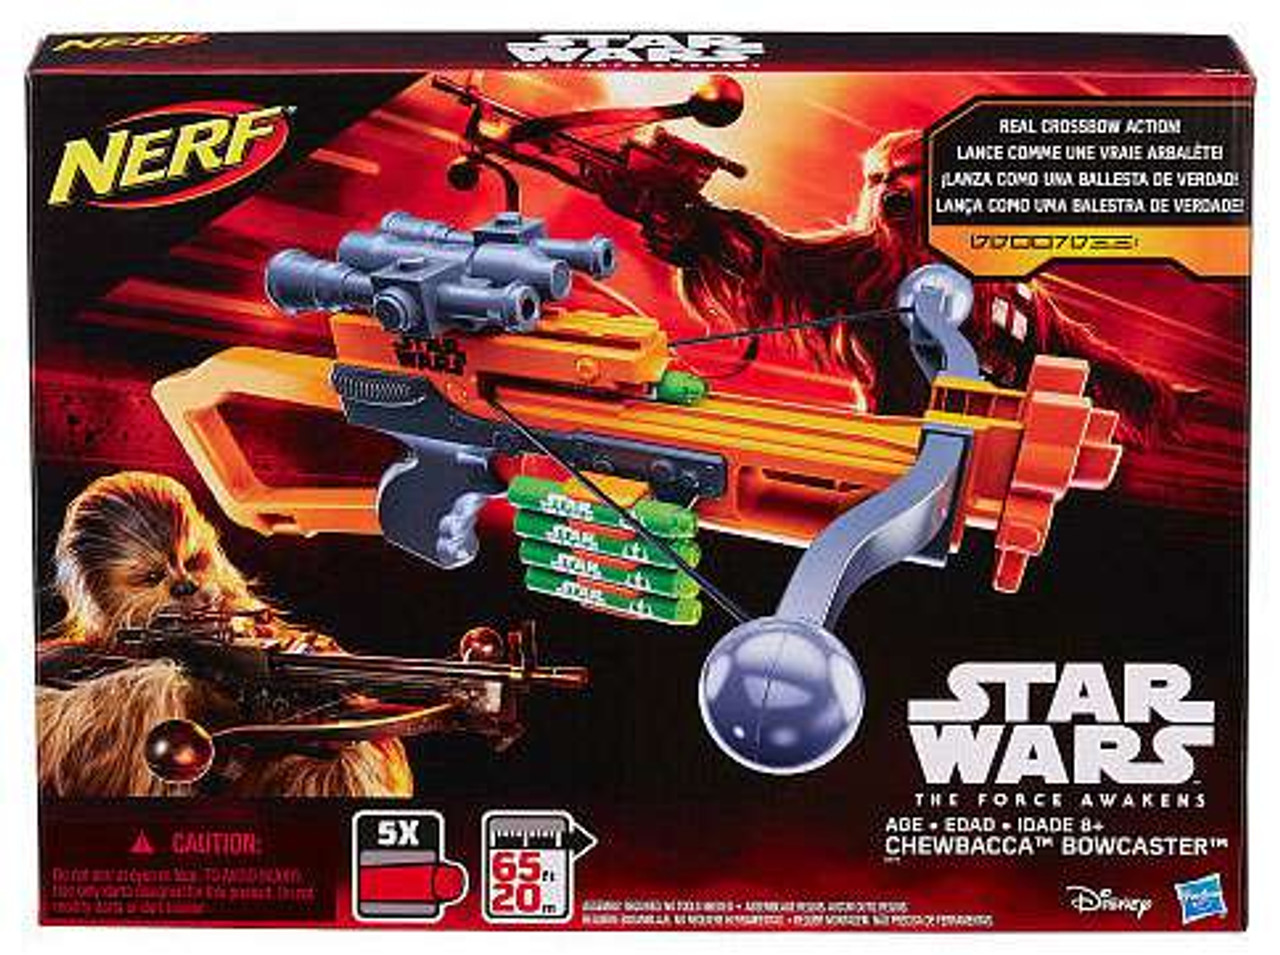 Star Wars The Force Awakens Nerf Chewbaccas Bowcaster Roleplay Toy Hasbro Toys Toywiz - random 5x roblox mystery champions legends of roblox figure toys no code weapon